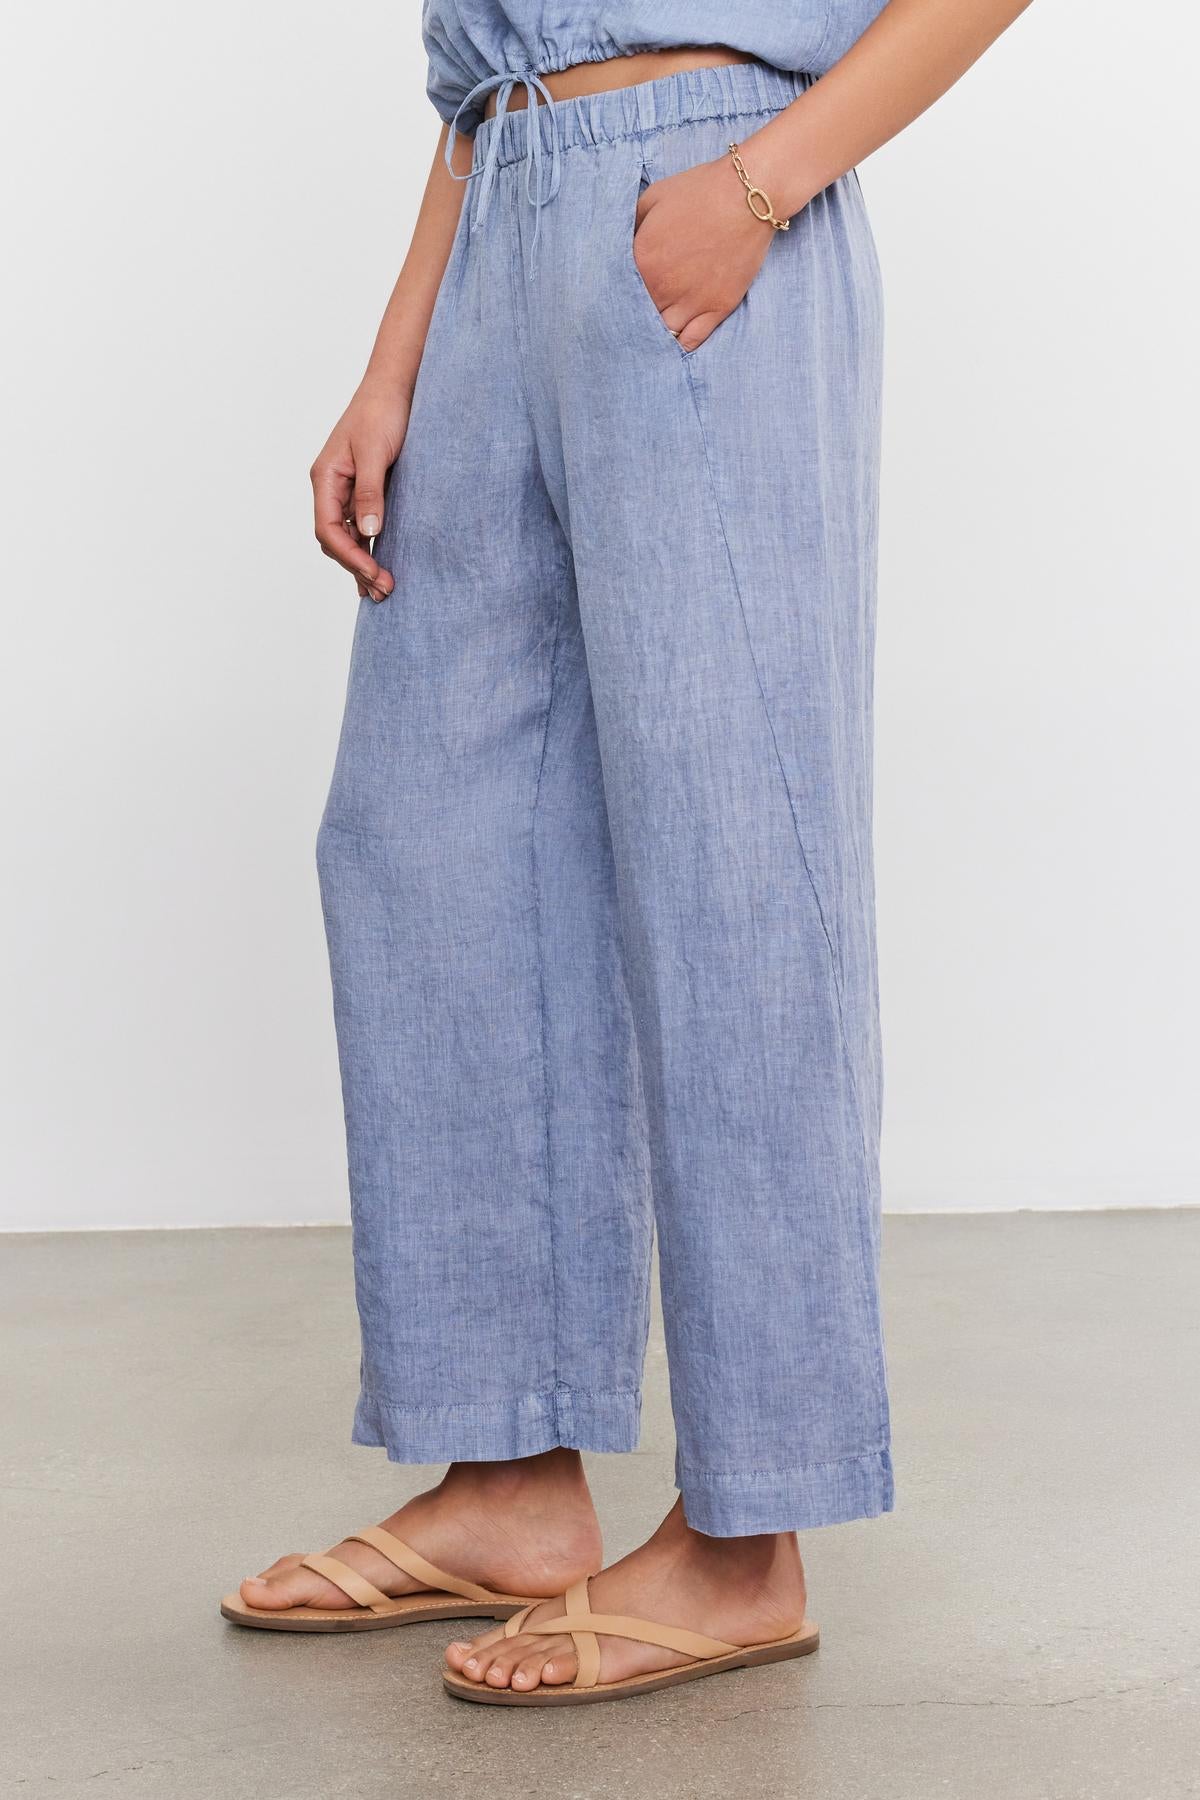 A person wearing Velvet by Graham & Spencer LOLA LINEN PANTS with an elastic waist and tan sandals, focusing on the lower half of the body.-36910133051585